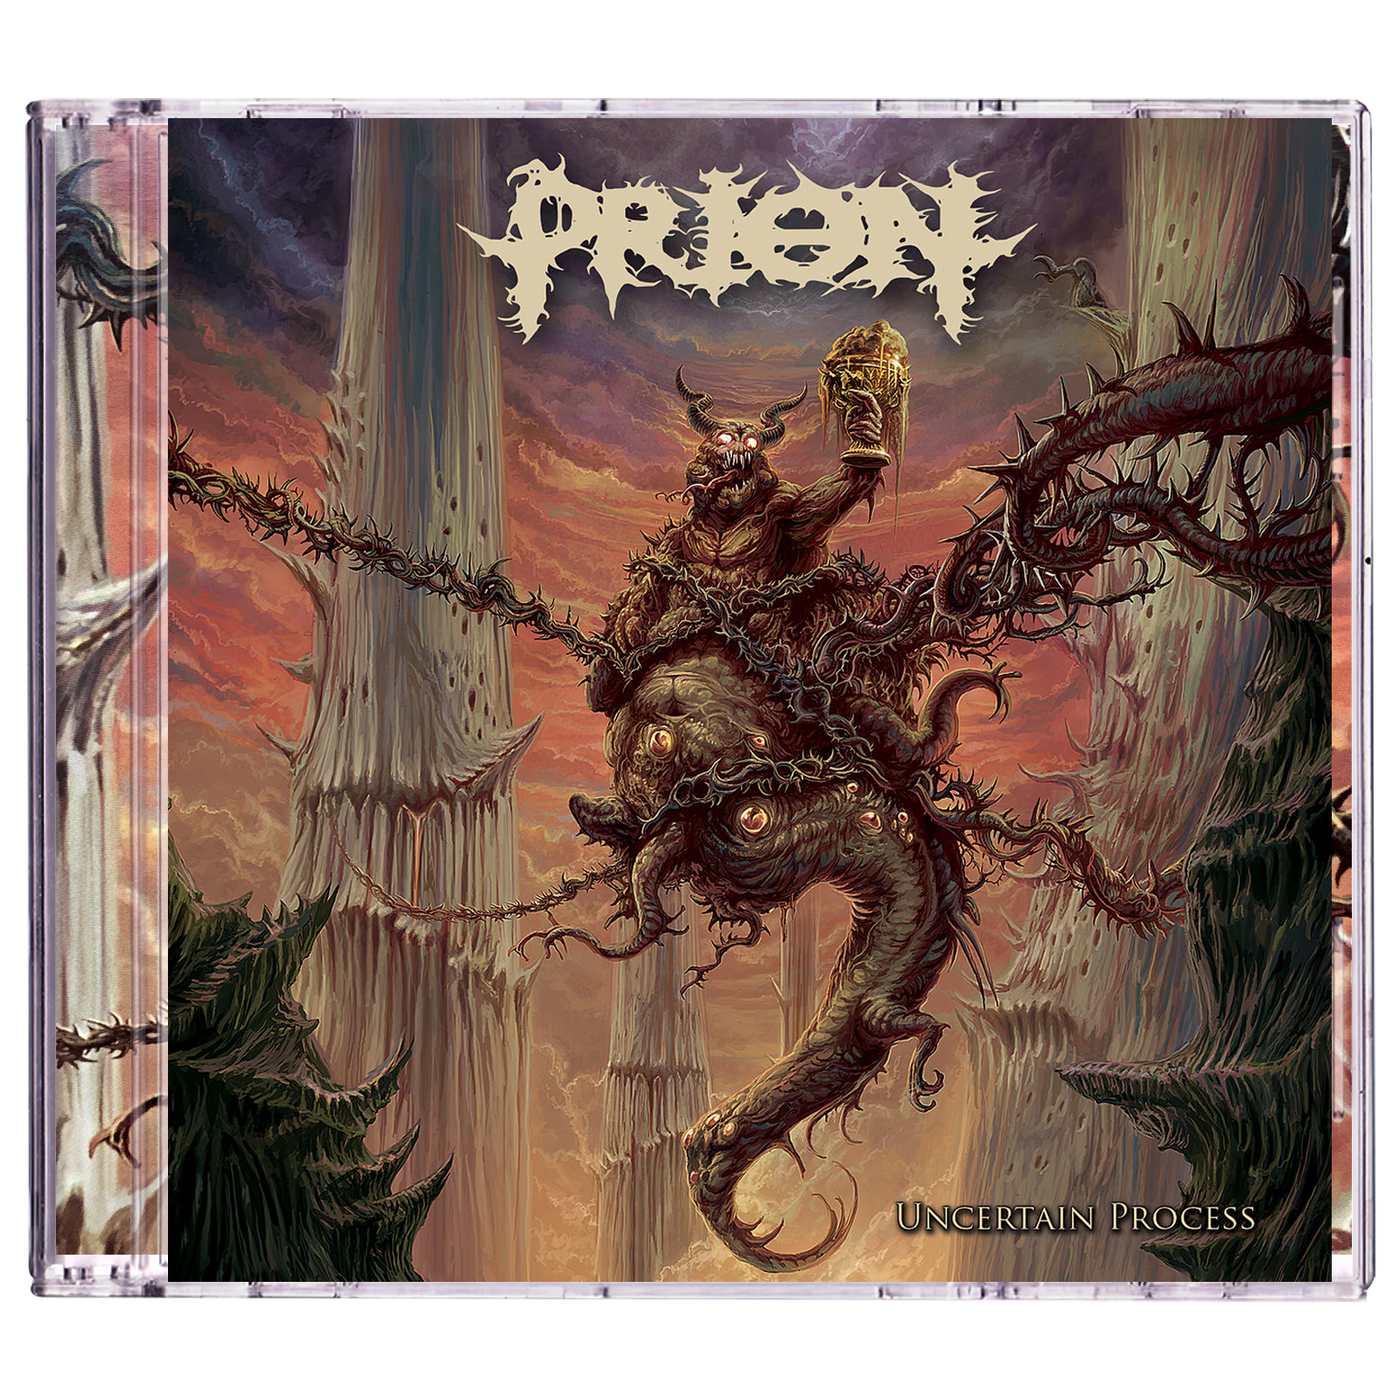 Prion 'Uncertain Process' CD + DVD